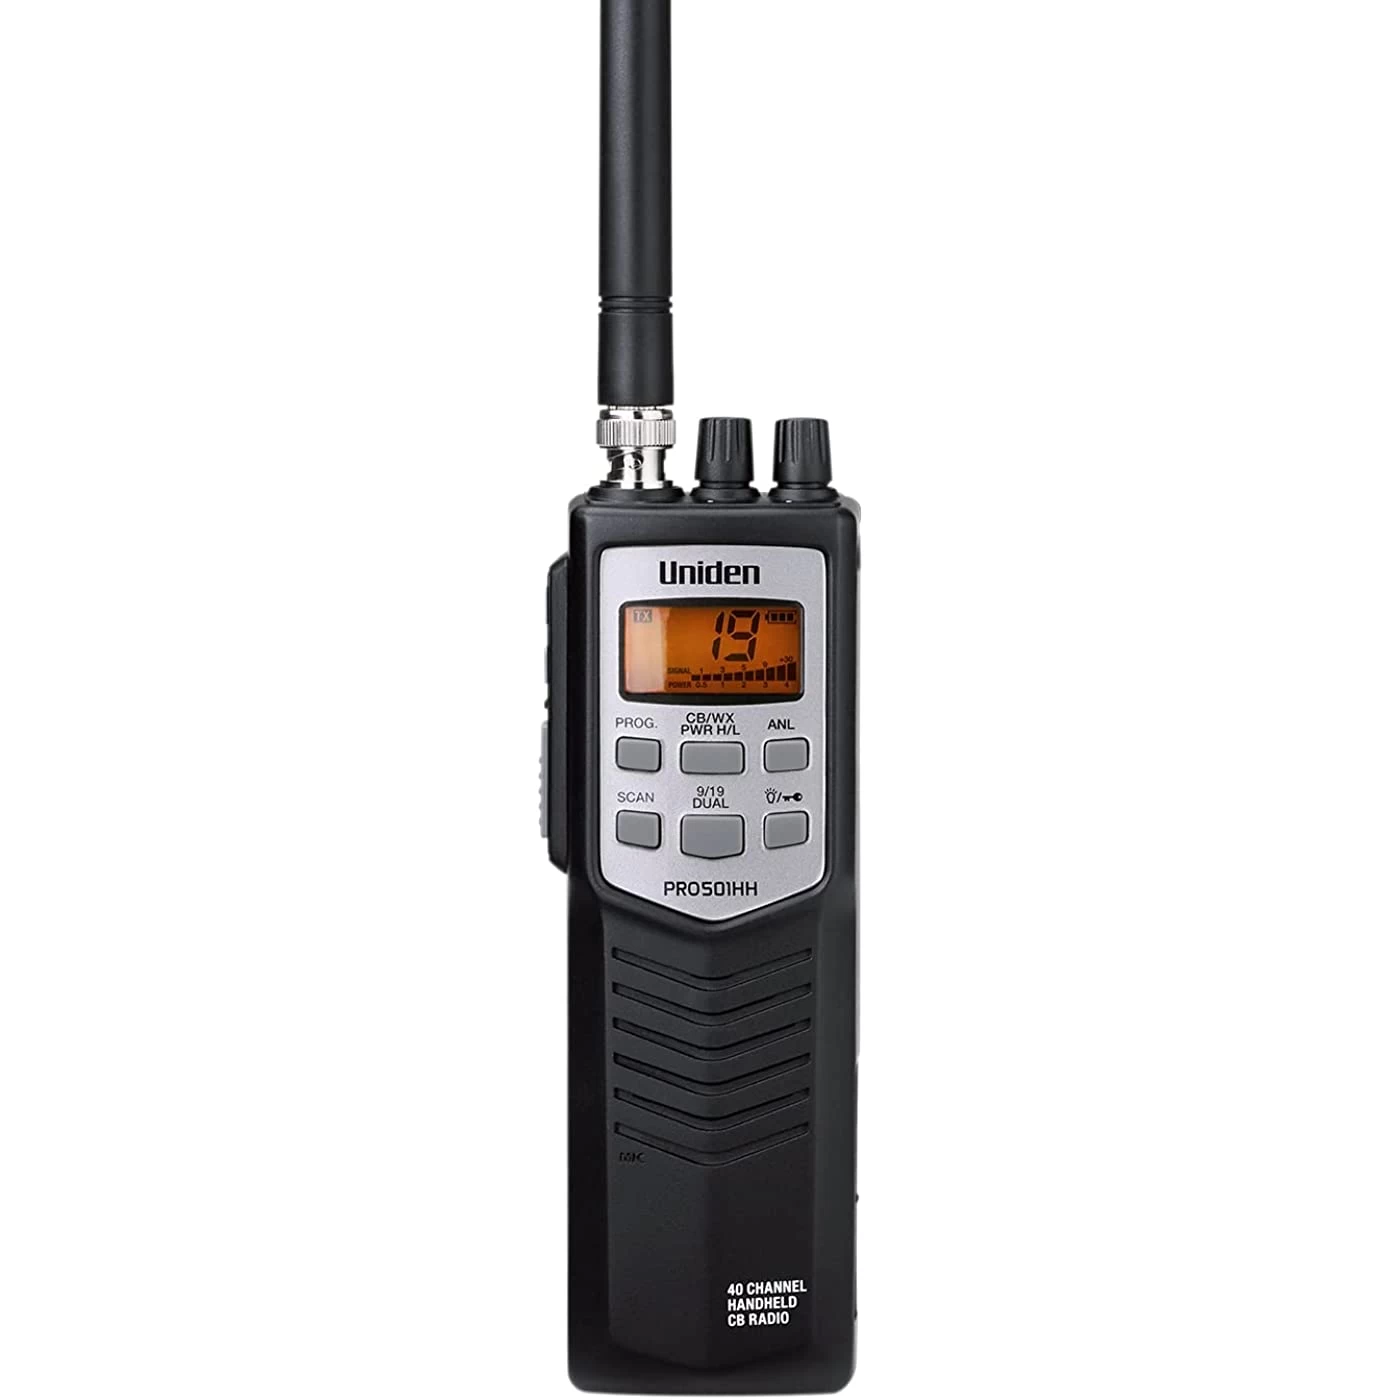 Uniden PRO501TK Pro-Series 40-Channel Portable Handheld CB Radio, Two-Way  Emergency Radio, includes High-Gain Magnet Mount Antenna, Auto Noise